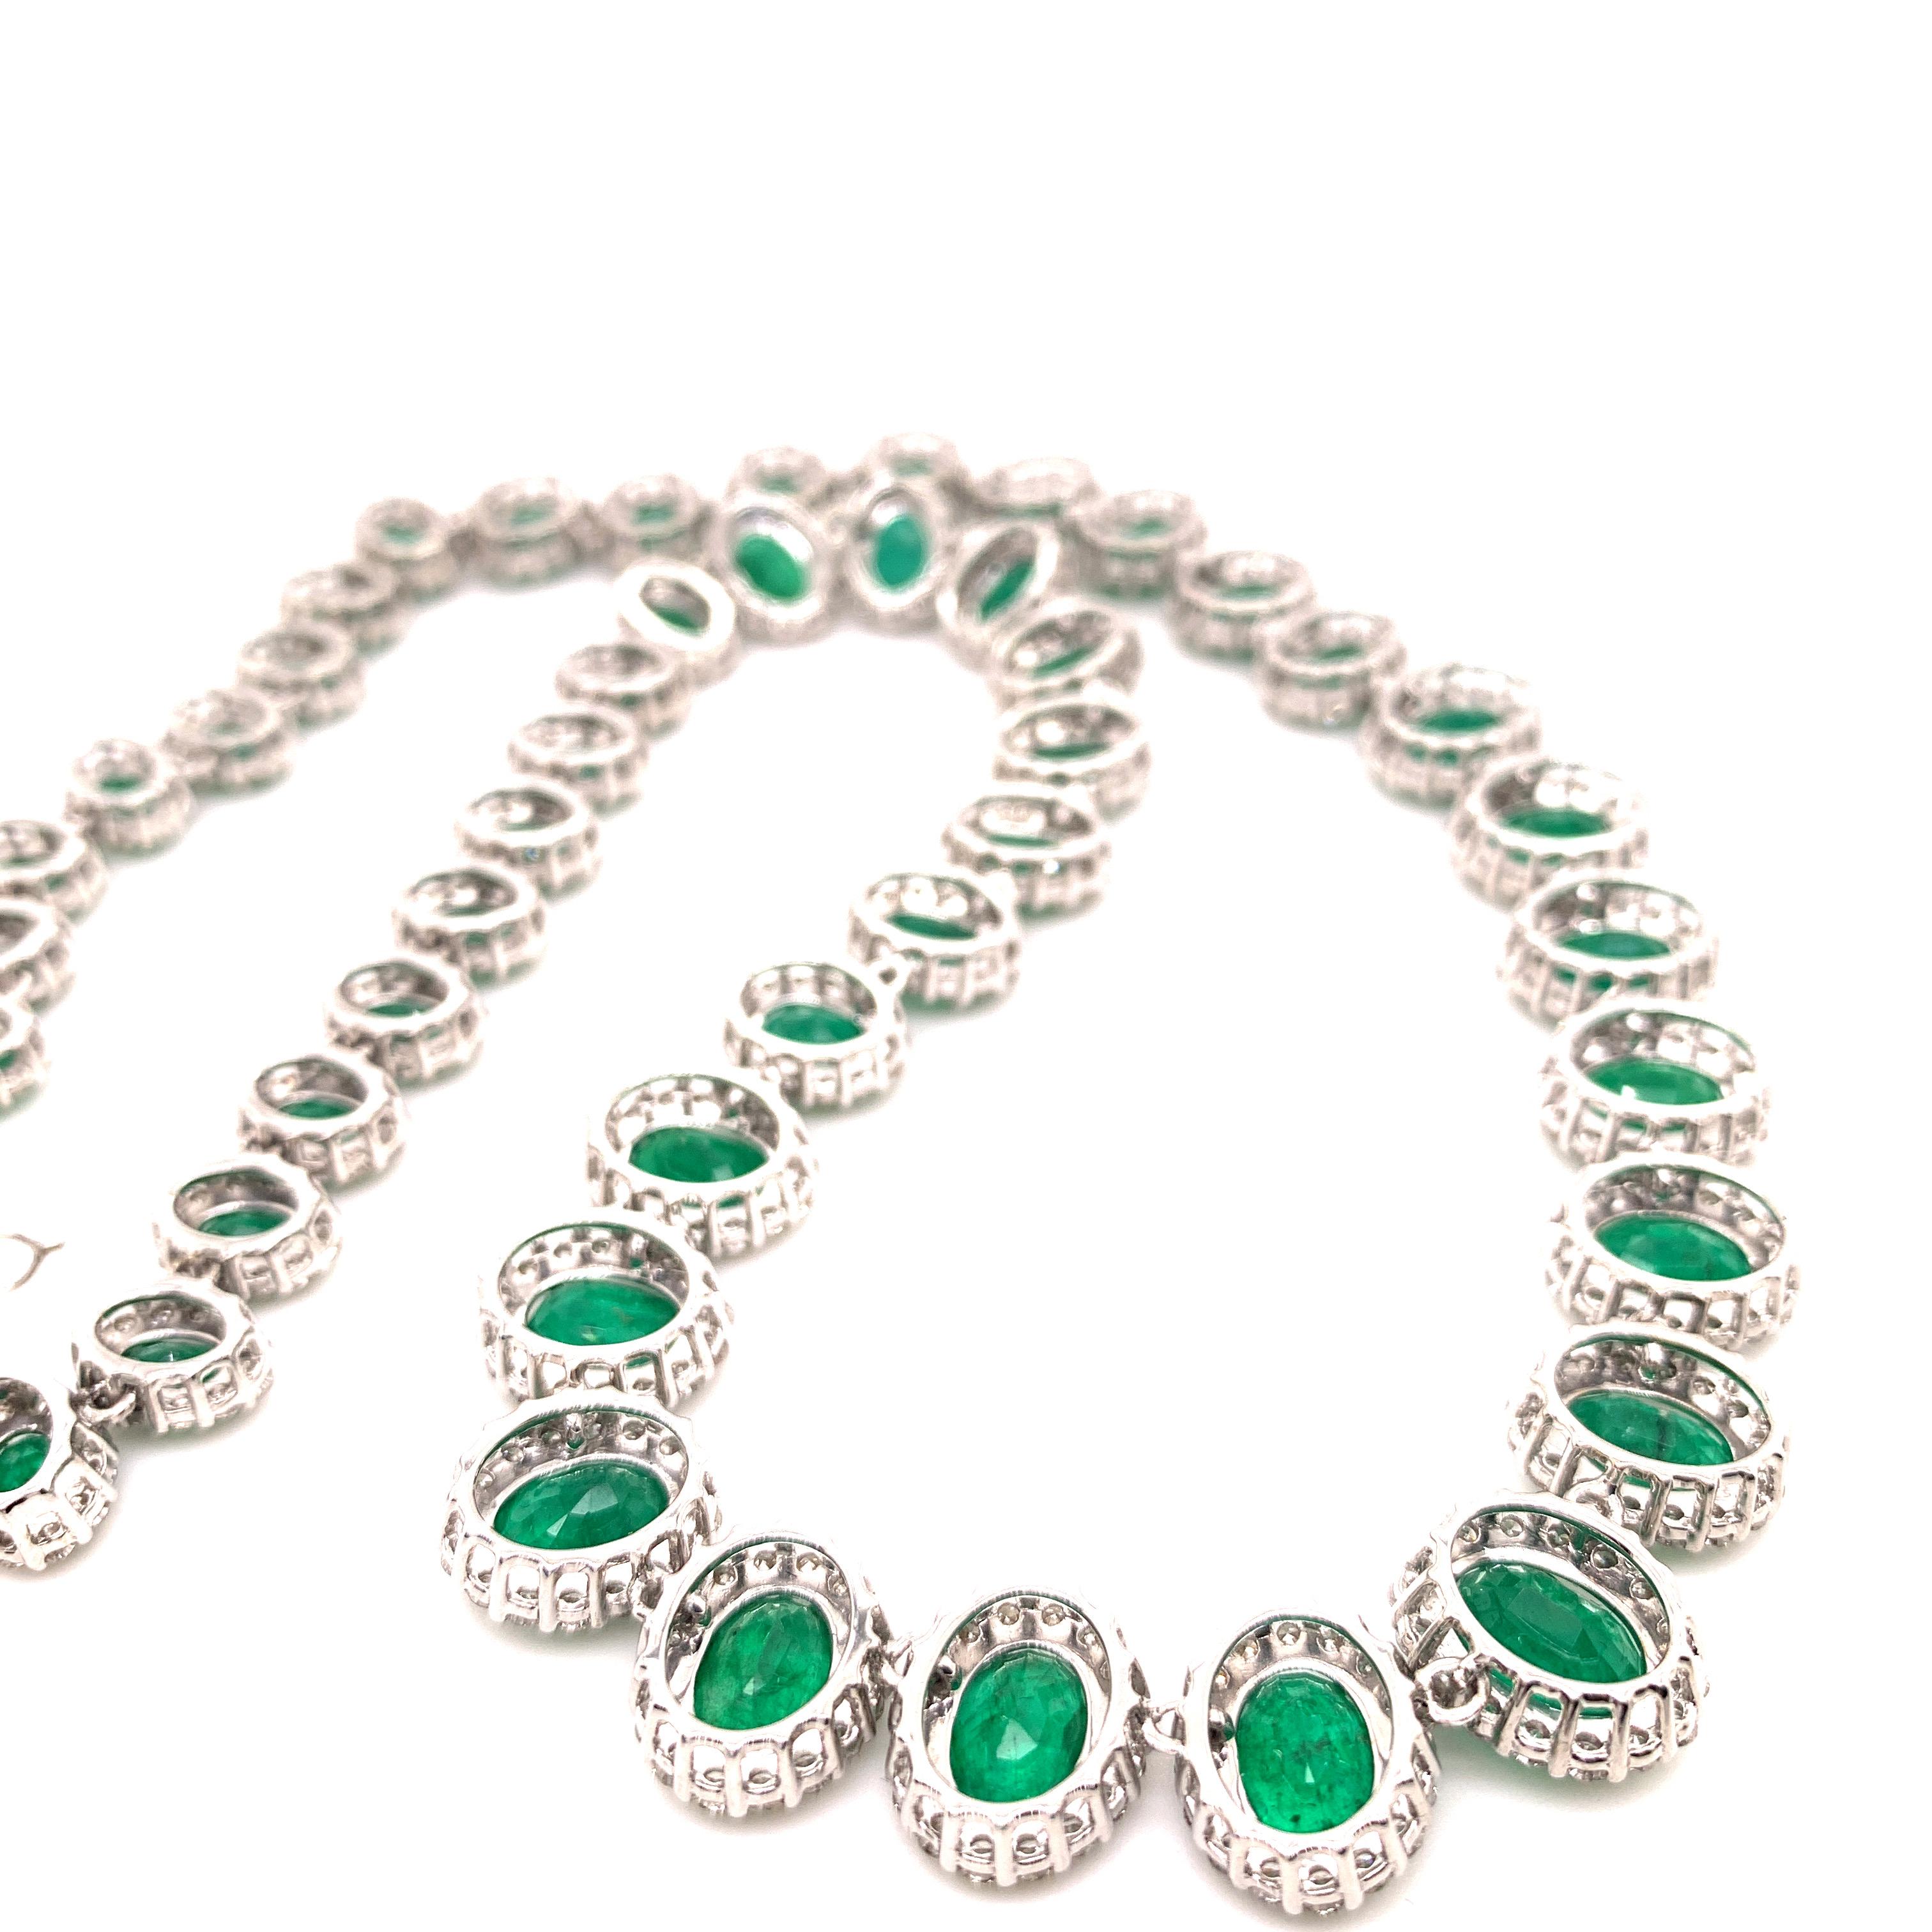 Timeless emerald diamond necklace earrings set. Lively intense green, high quality, high luster, oval faceted, 35.37 carats natural emeralds necklace, mounted in high profile open basket with bead prong, accented with round brilliant cut diamonds.